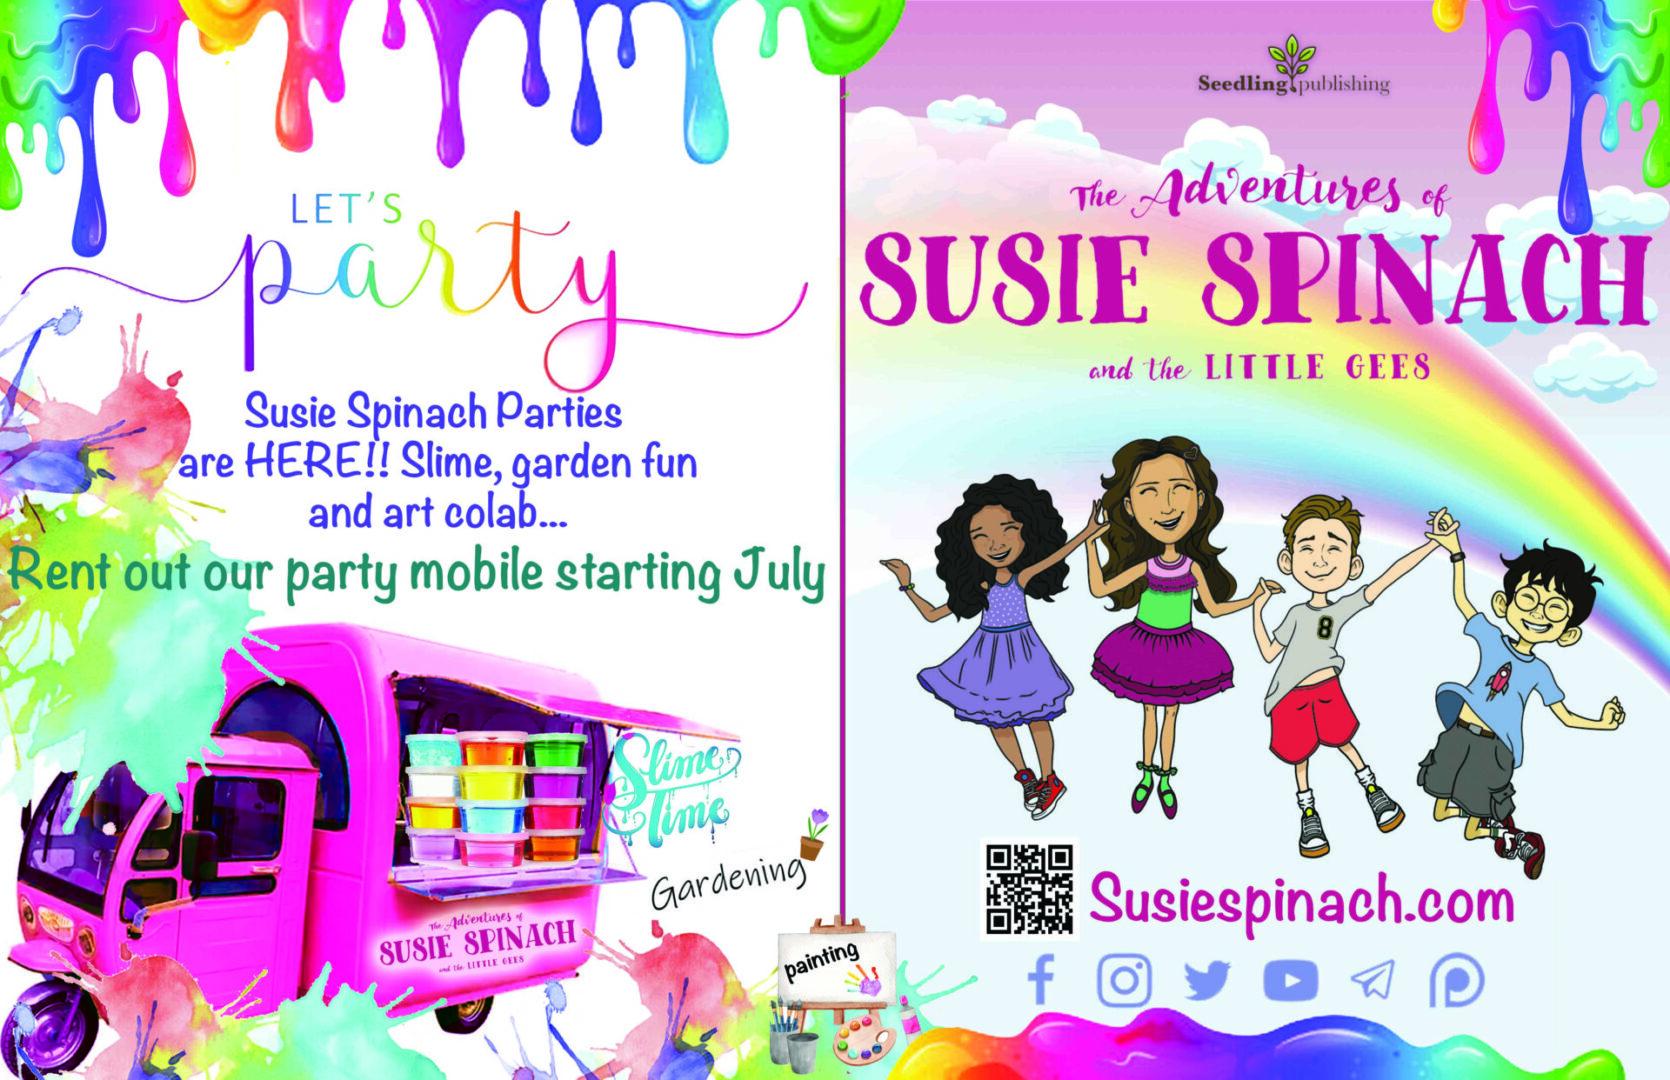 A poster for the party featuring susie spinach.